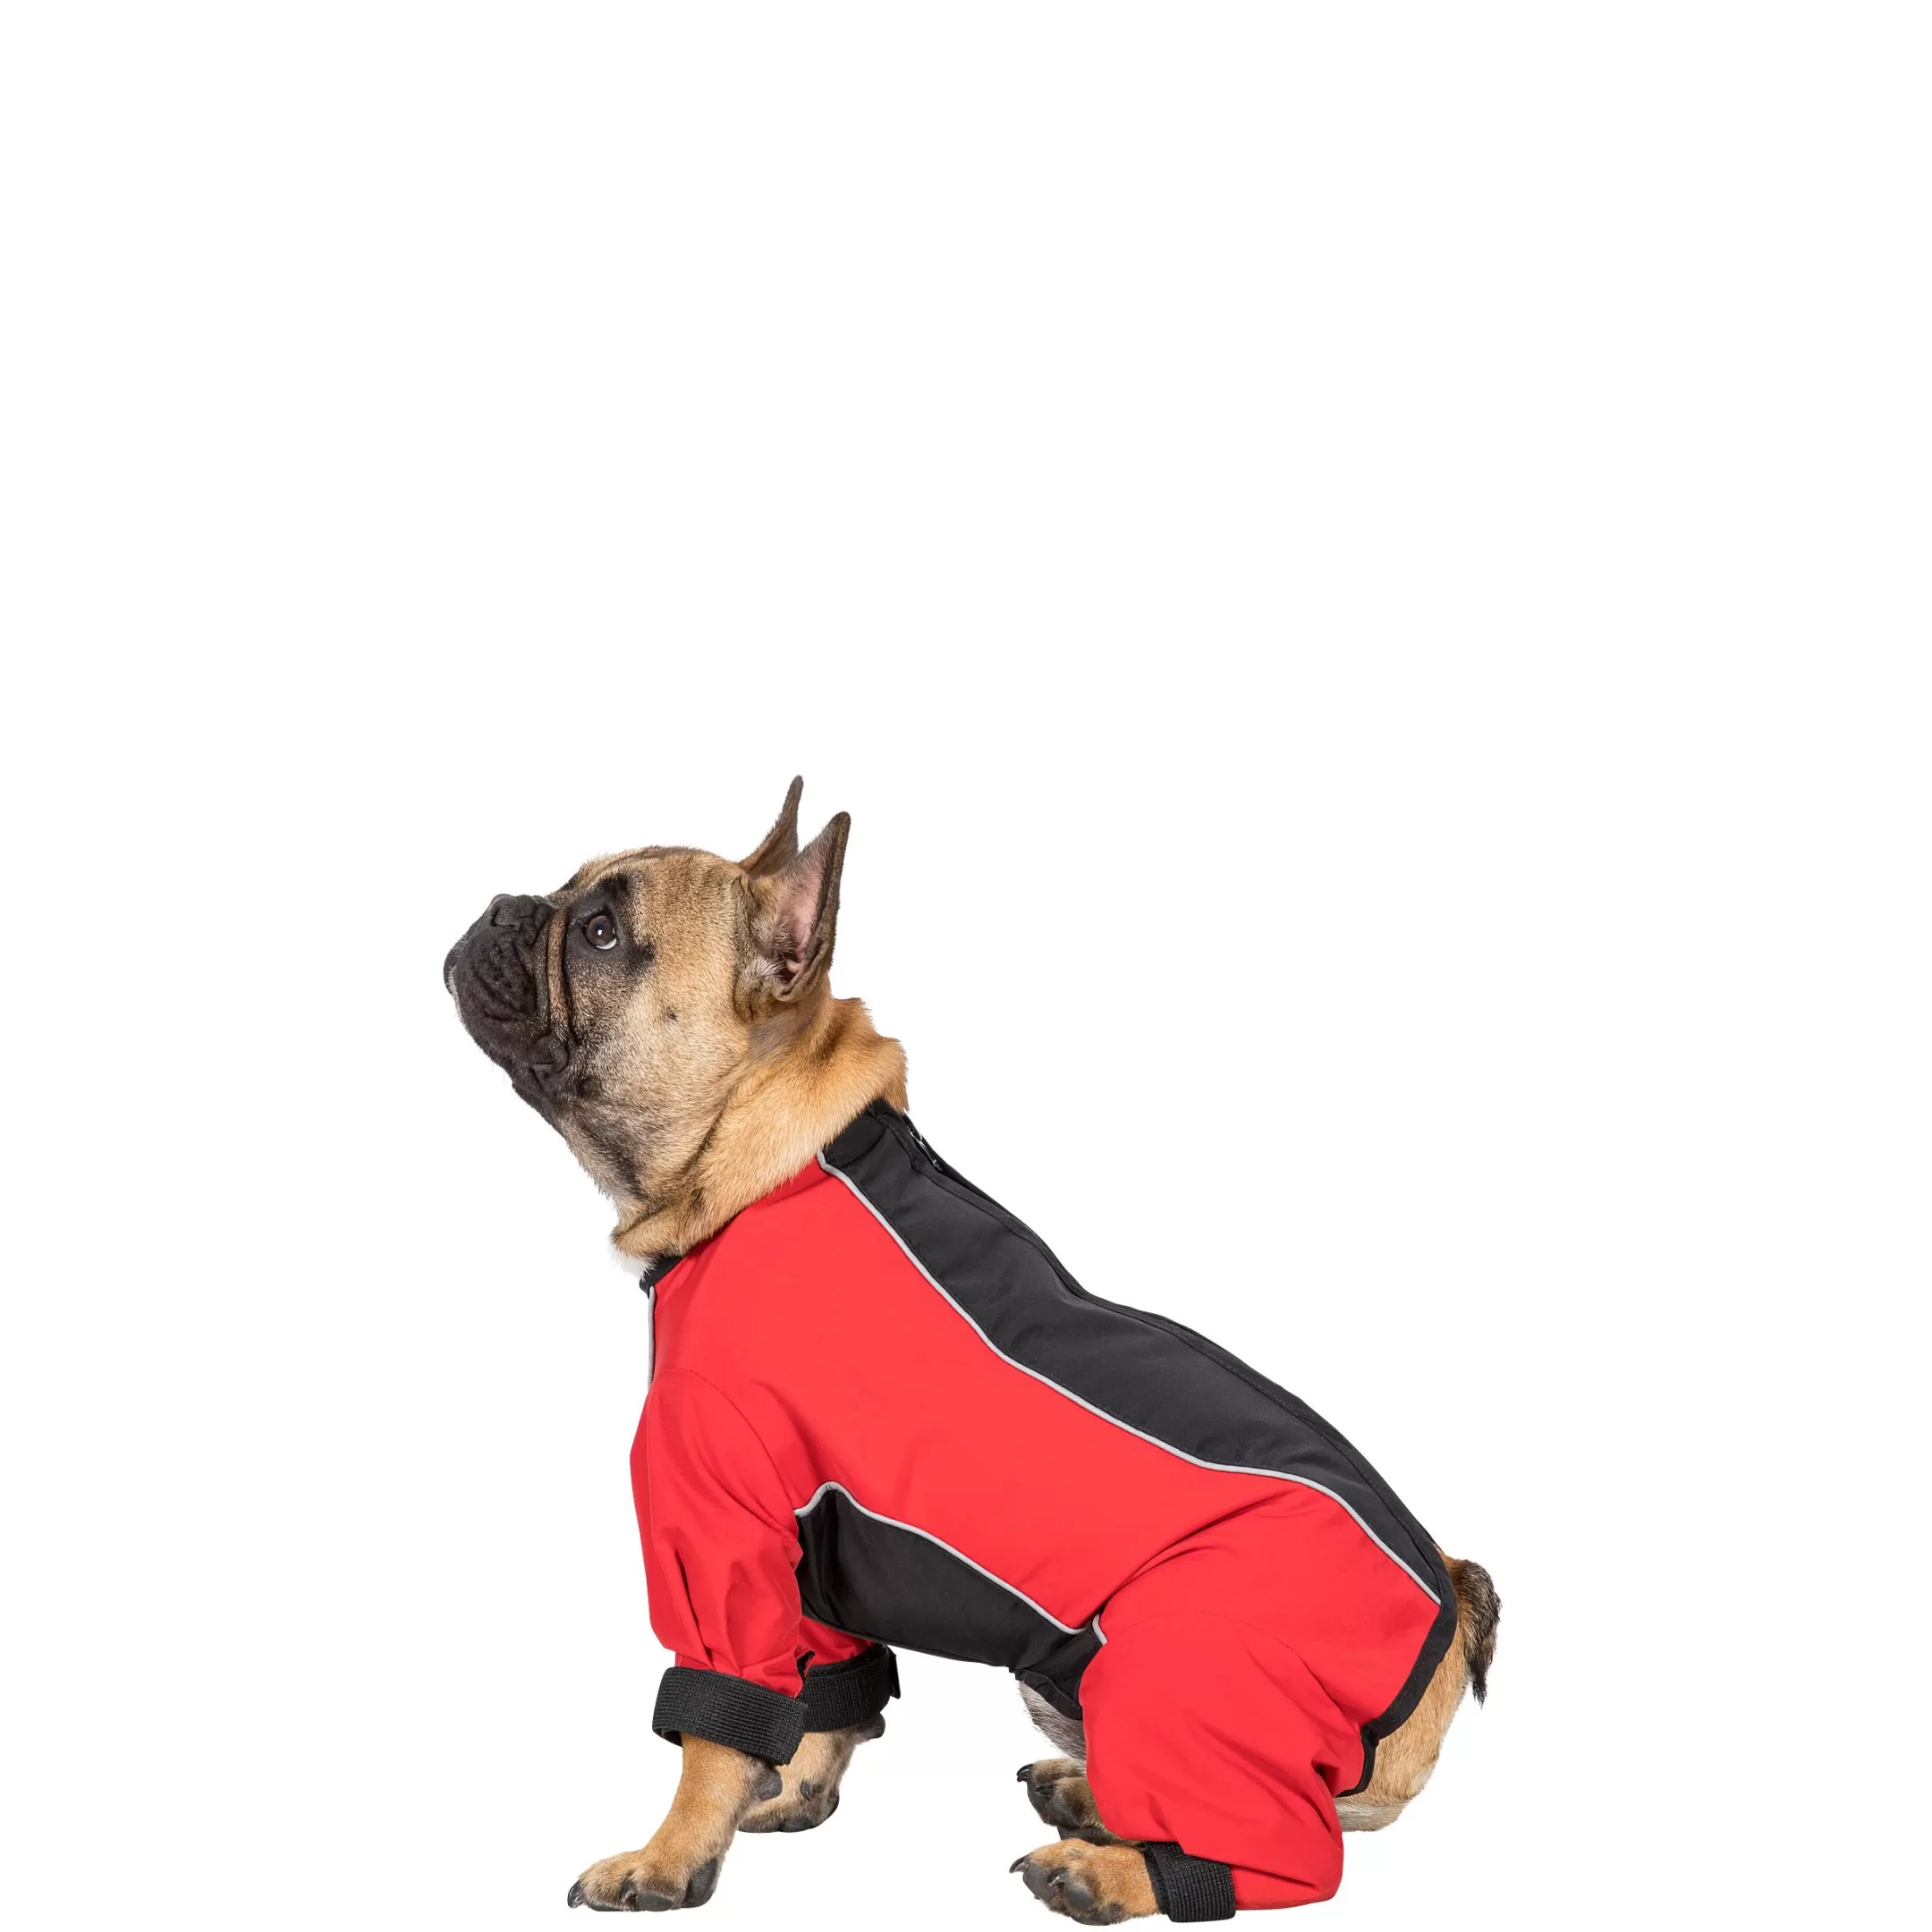 Trespaws Small Windproof Dog Coat with Leg Covers in Red Tia | Trespass Fashion